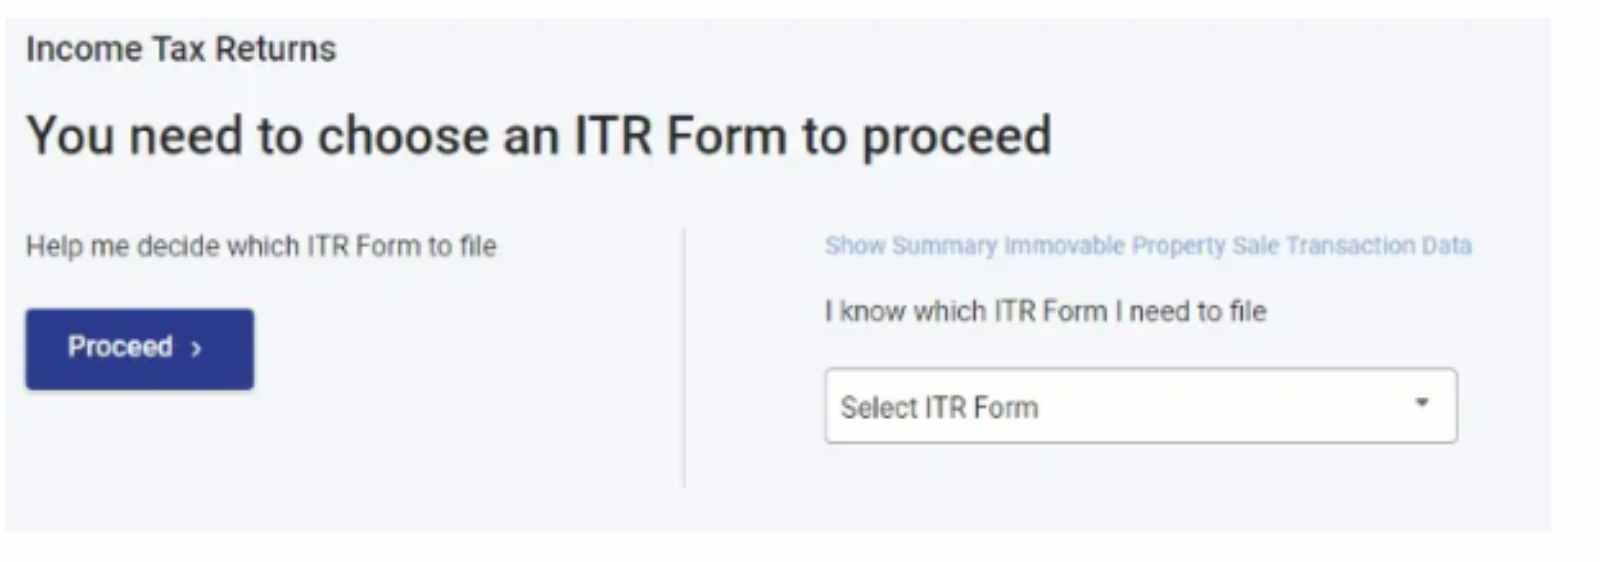 ITR Form selection